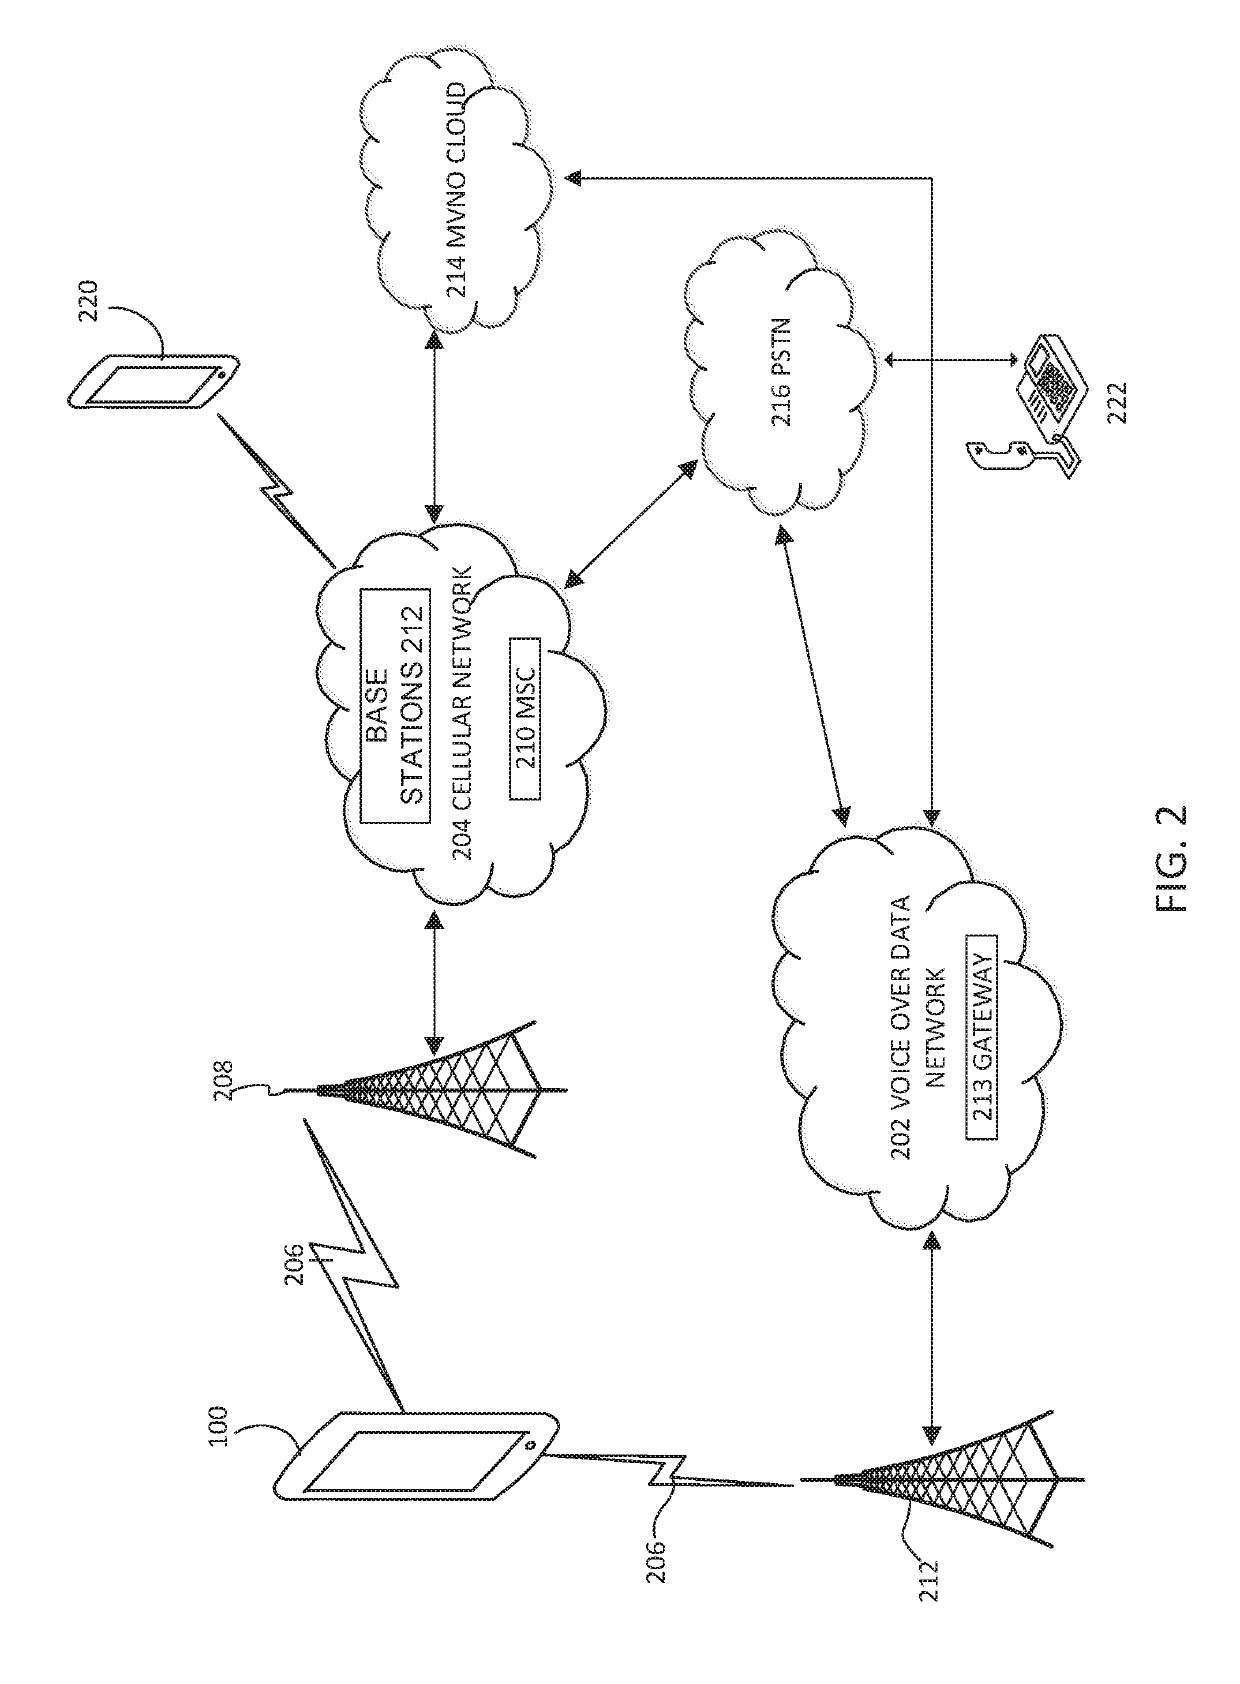 Device, system, and process for providing emergency calling service for a wireless device using voice over data